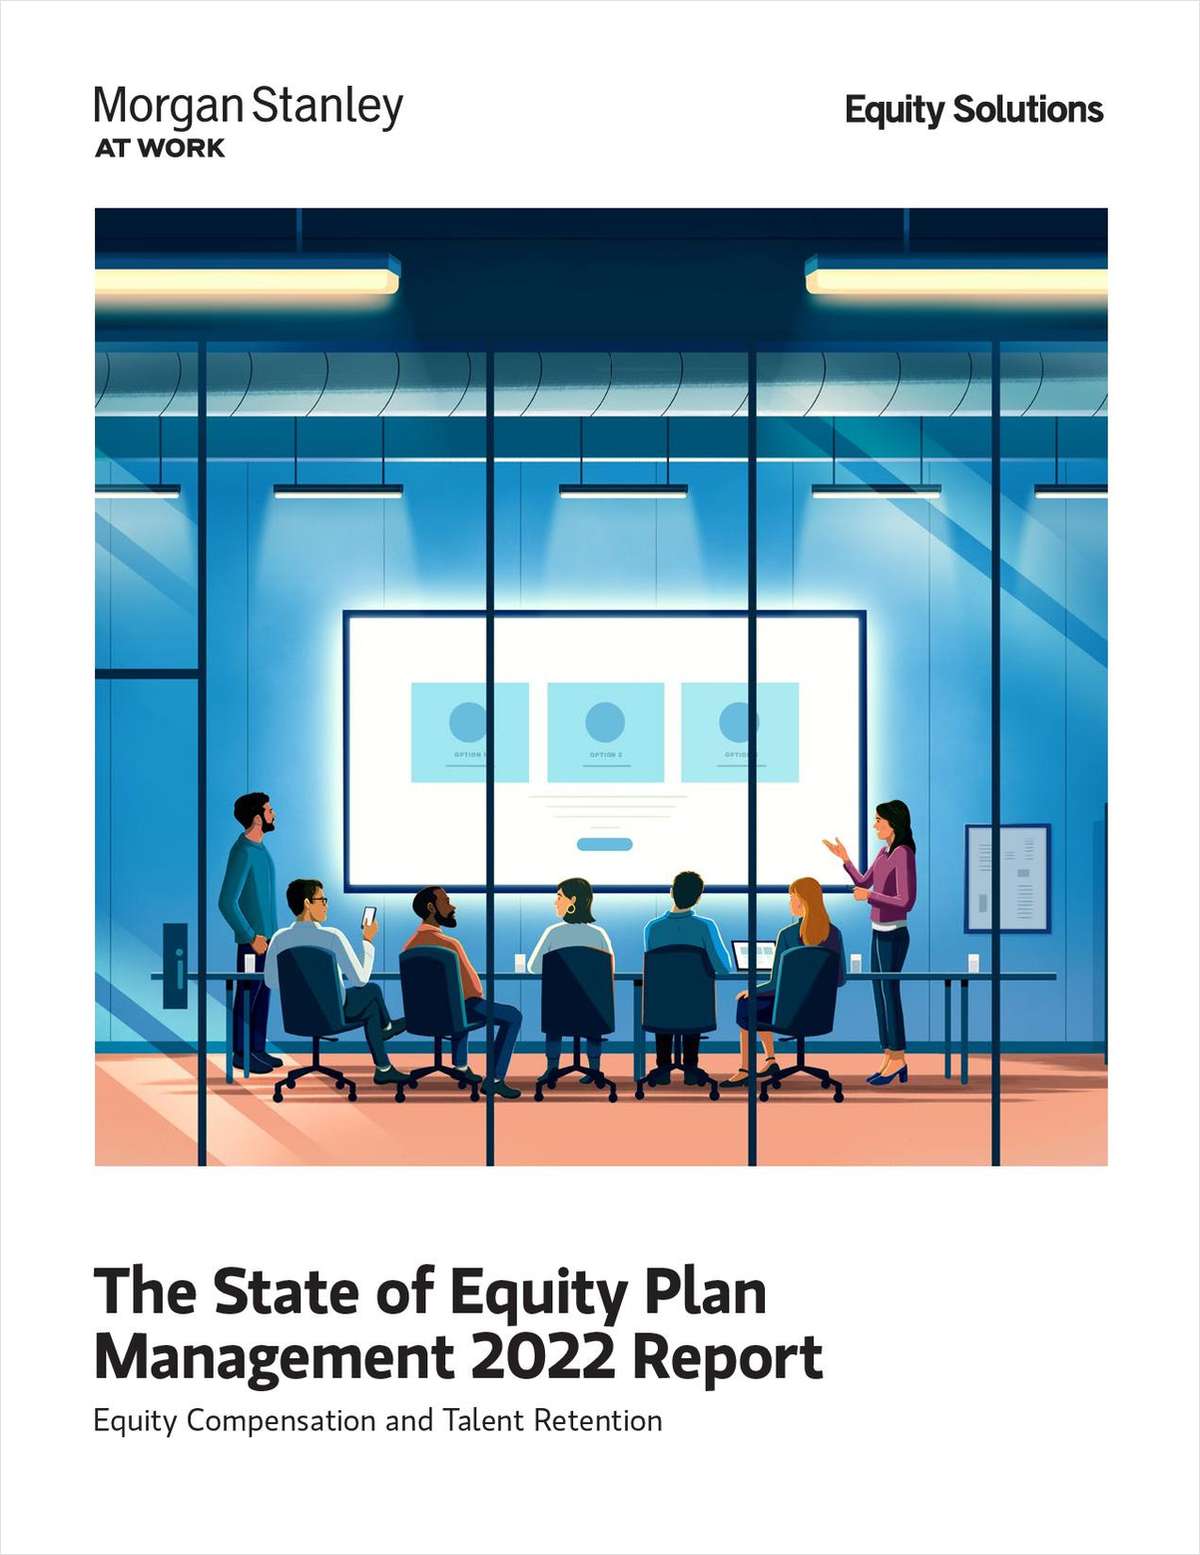 The State of Equity Plan Management 2022 Report